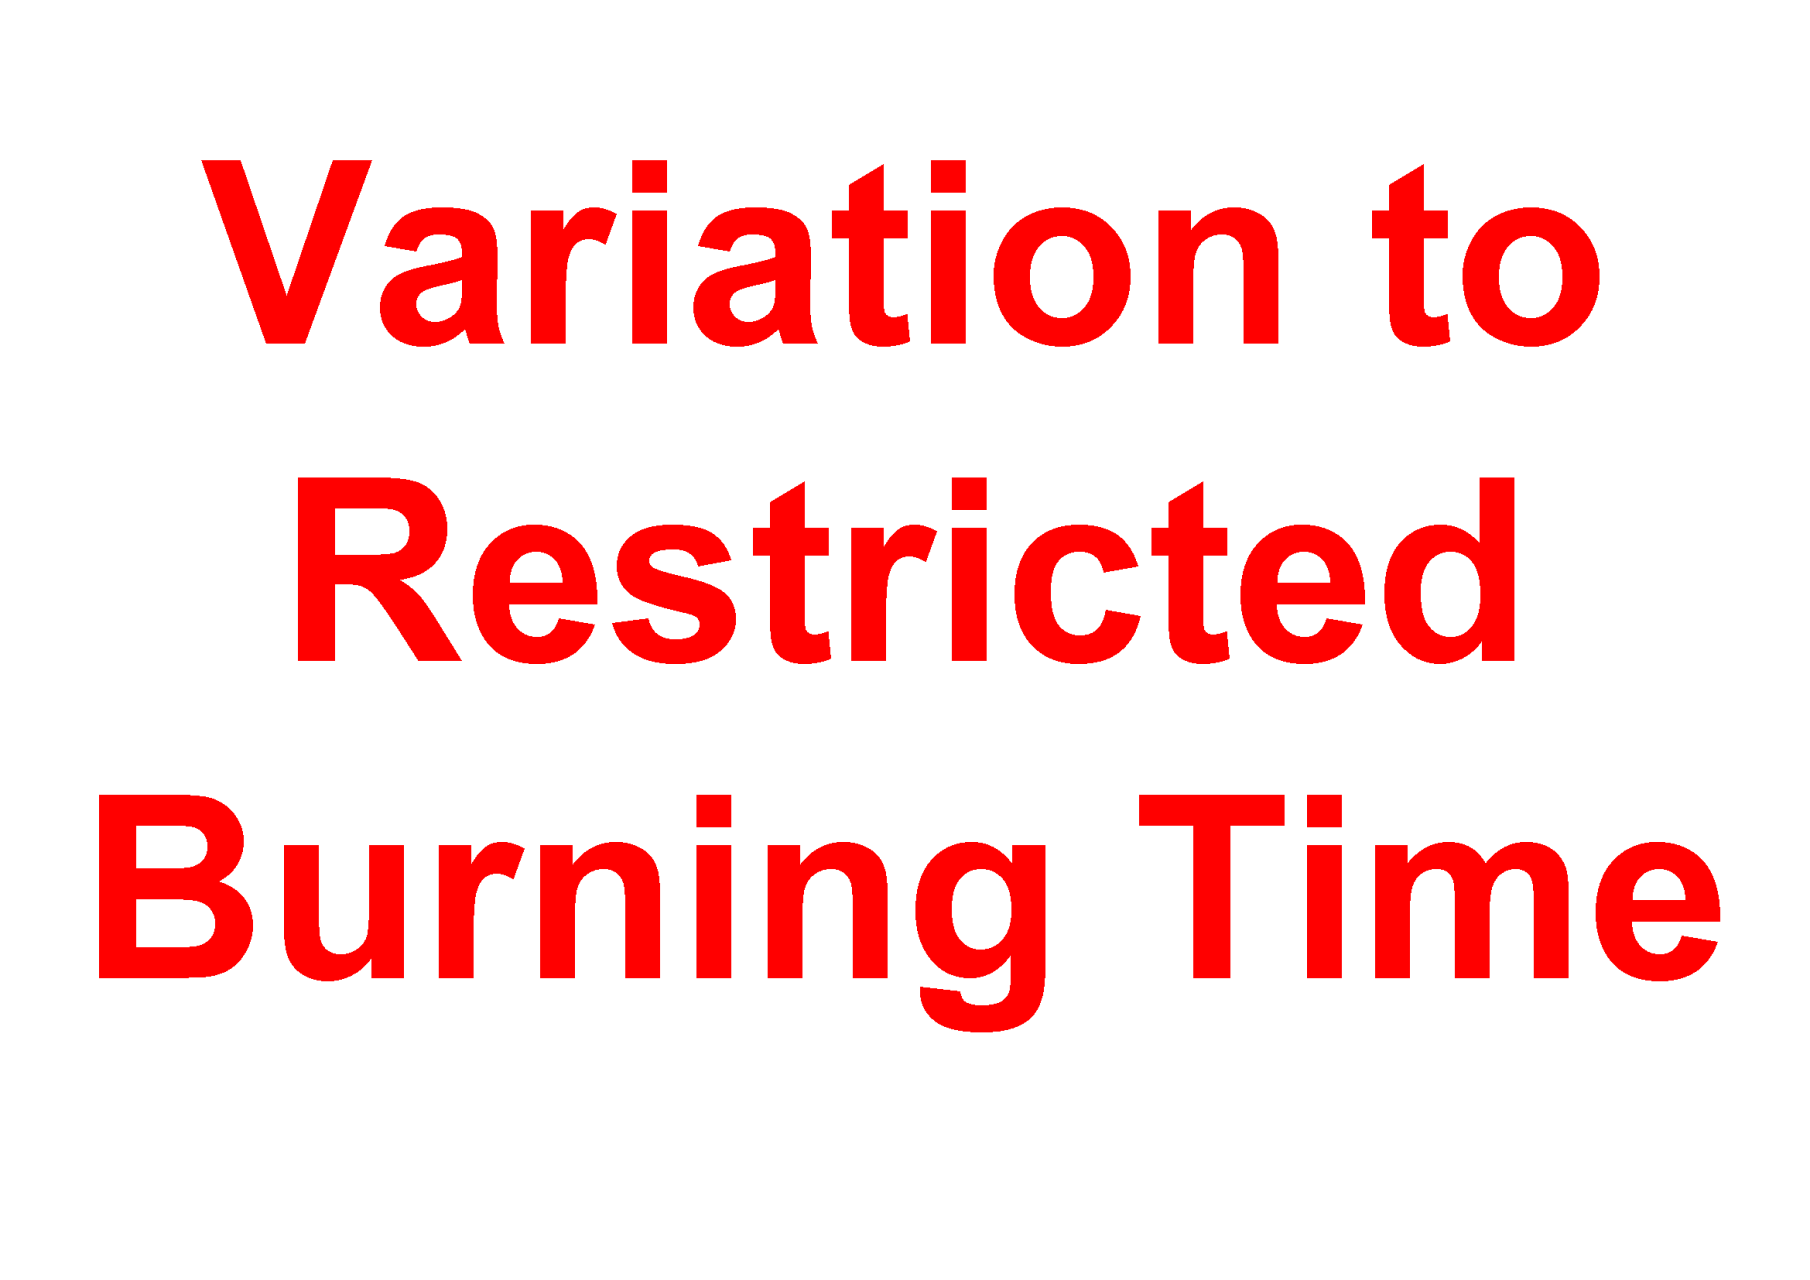 Variation to Restricted Burning Time